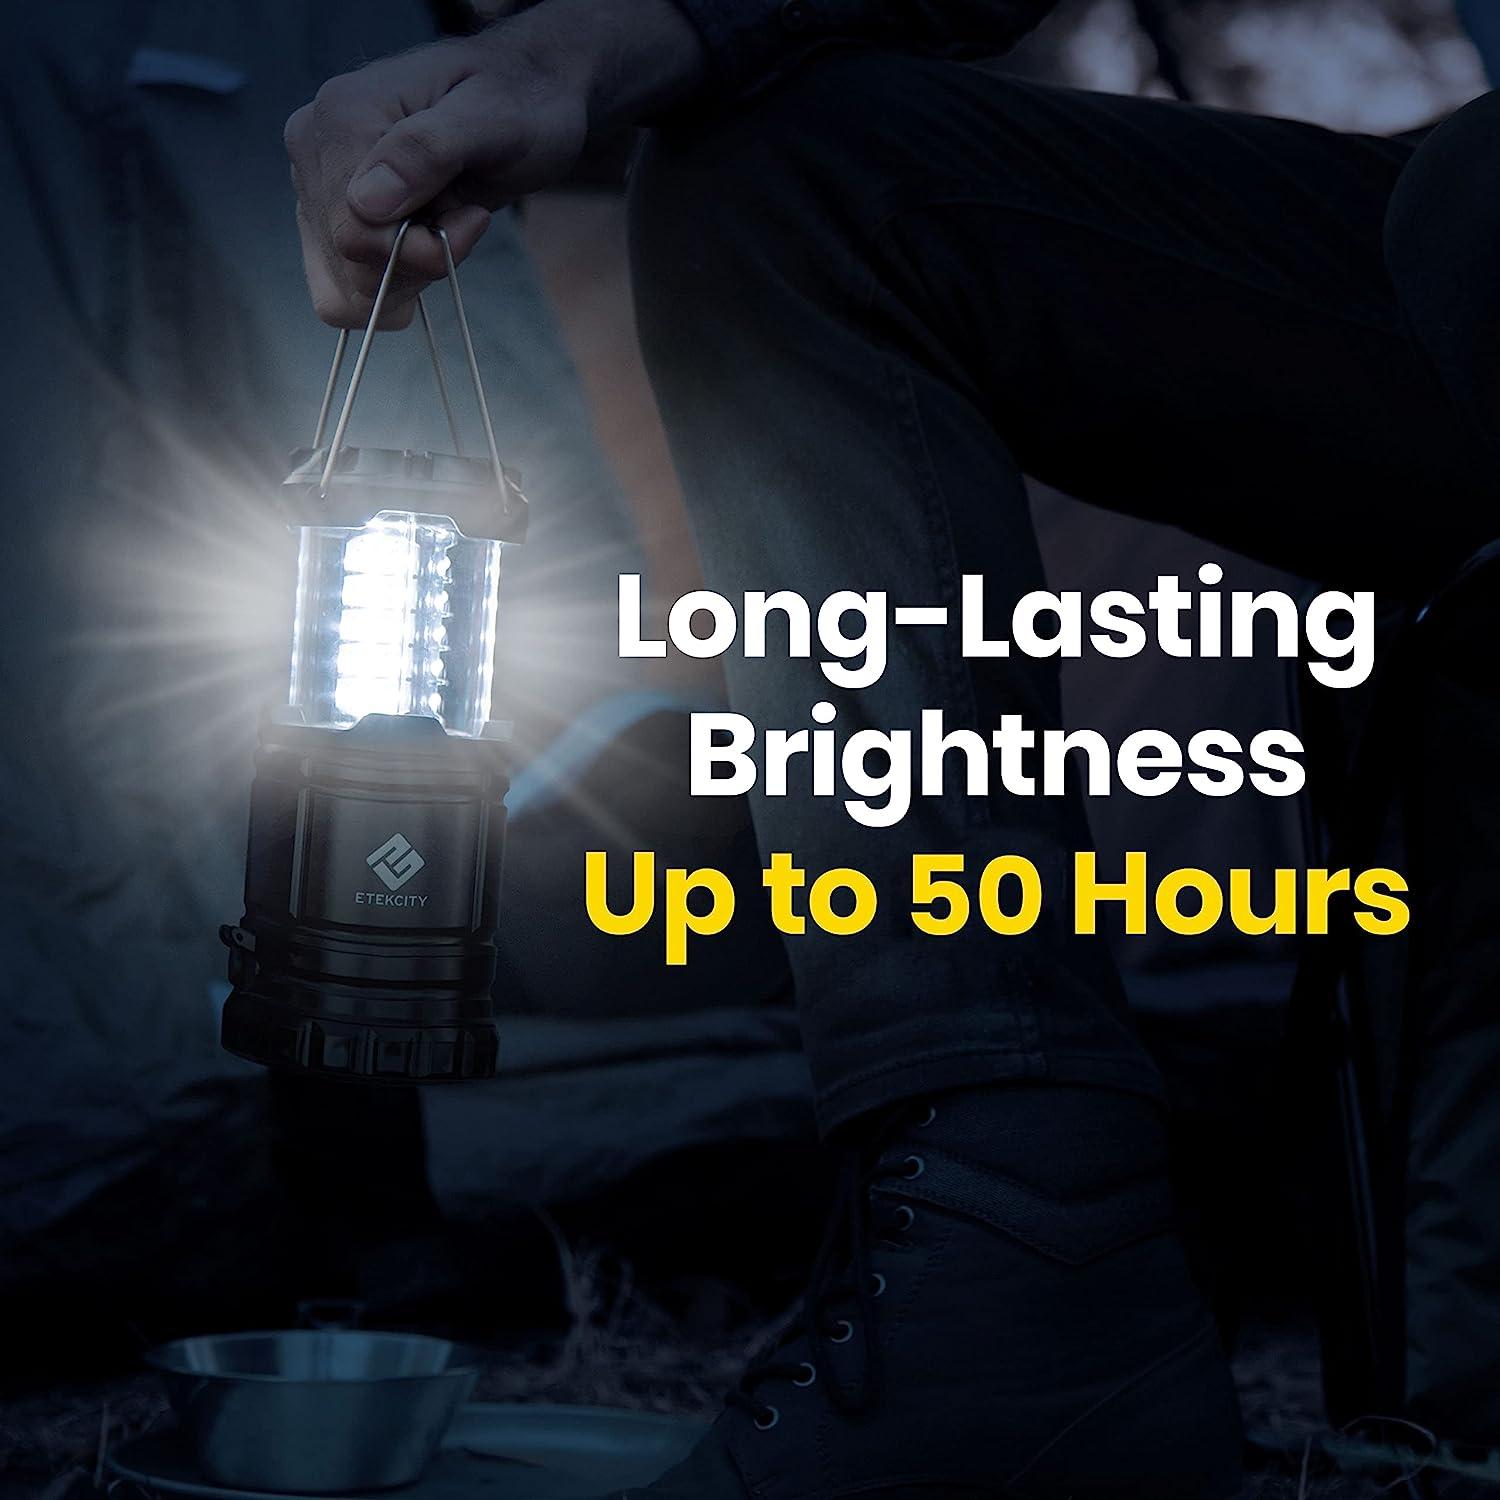 This 2-pack of Etekcity LED camping lanterns is down to an